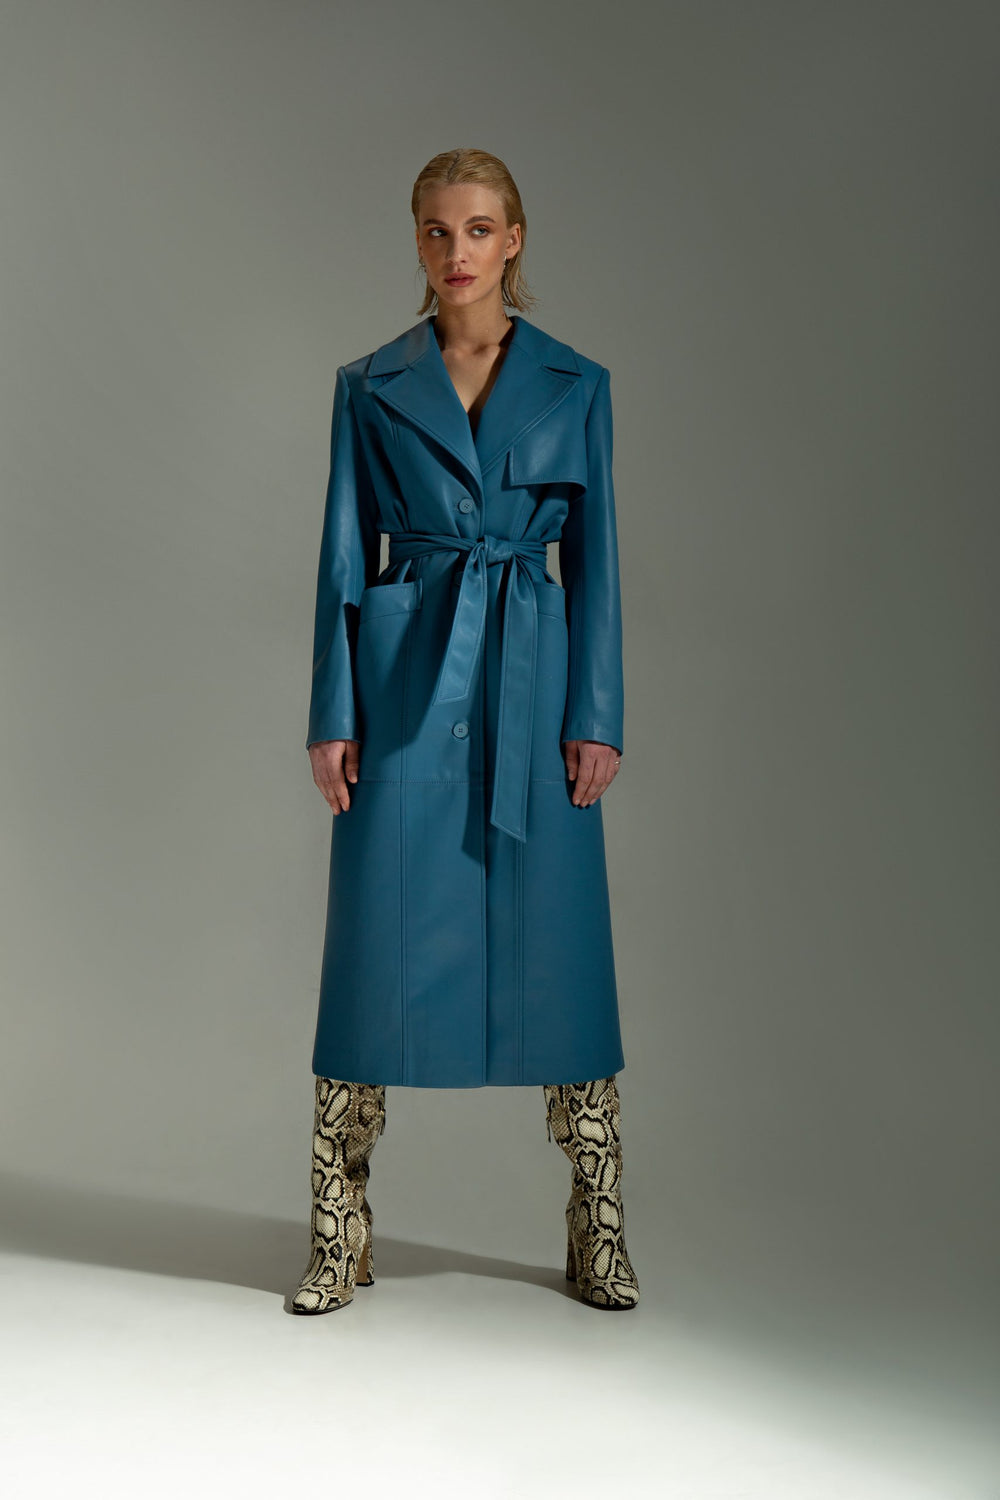 Woman wearing the Gladys Coat sewing pattern from Vikisews on The Fold Line. A coat pattern made in faux leather, denim, corduroy, blended raincoat fabrics or thick cotton gabardine fabrics, featuring a semi-fit, straight-cut, fully lined, detachable belt